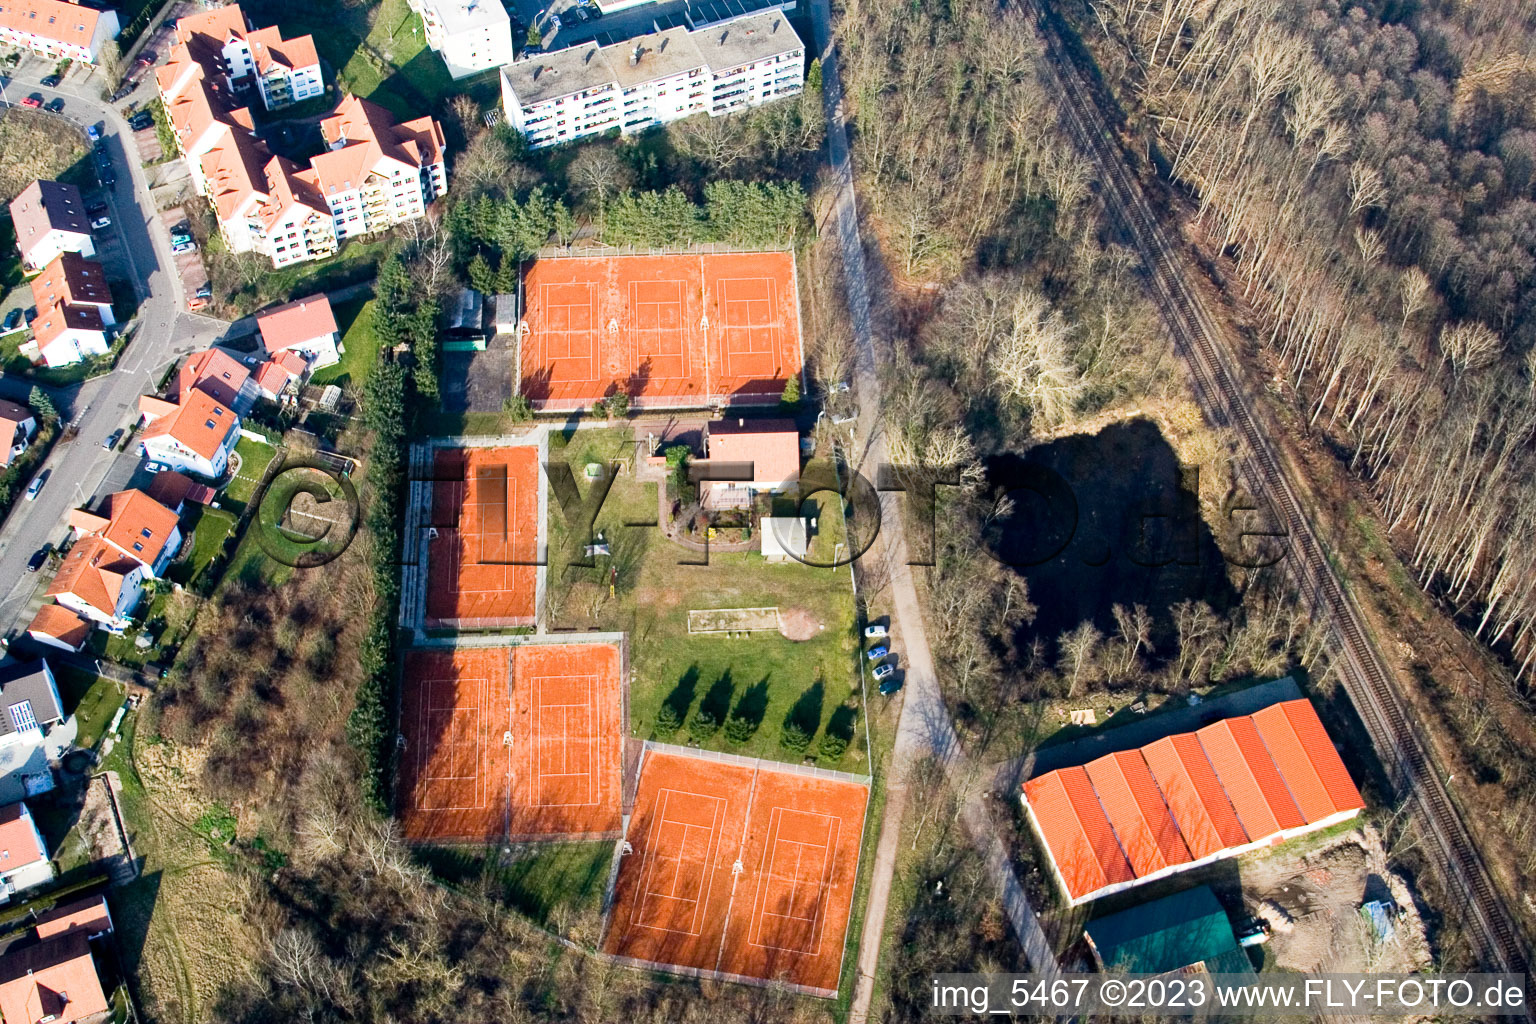 Oblique view of Tennis club in Jockgrim in the state Rhineland-Palatinate, Germany